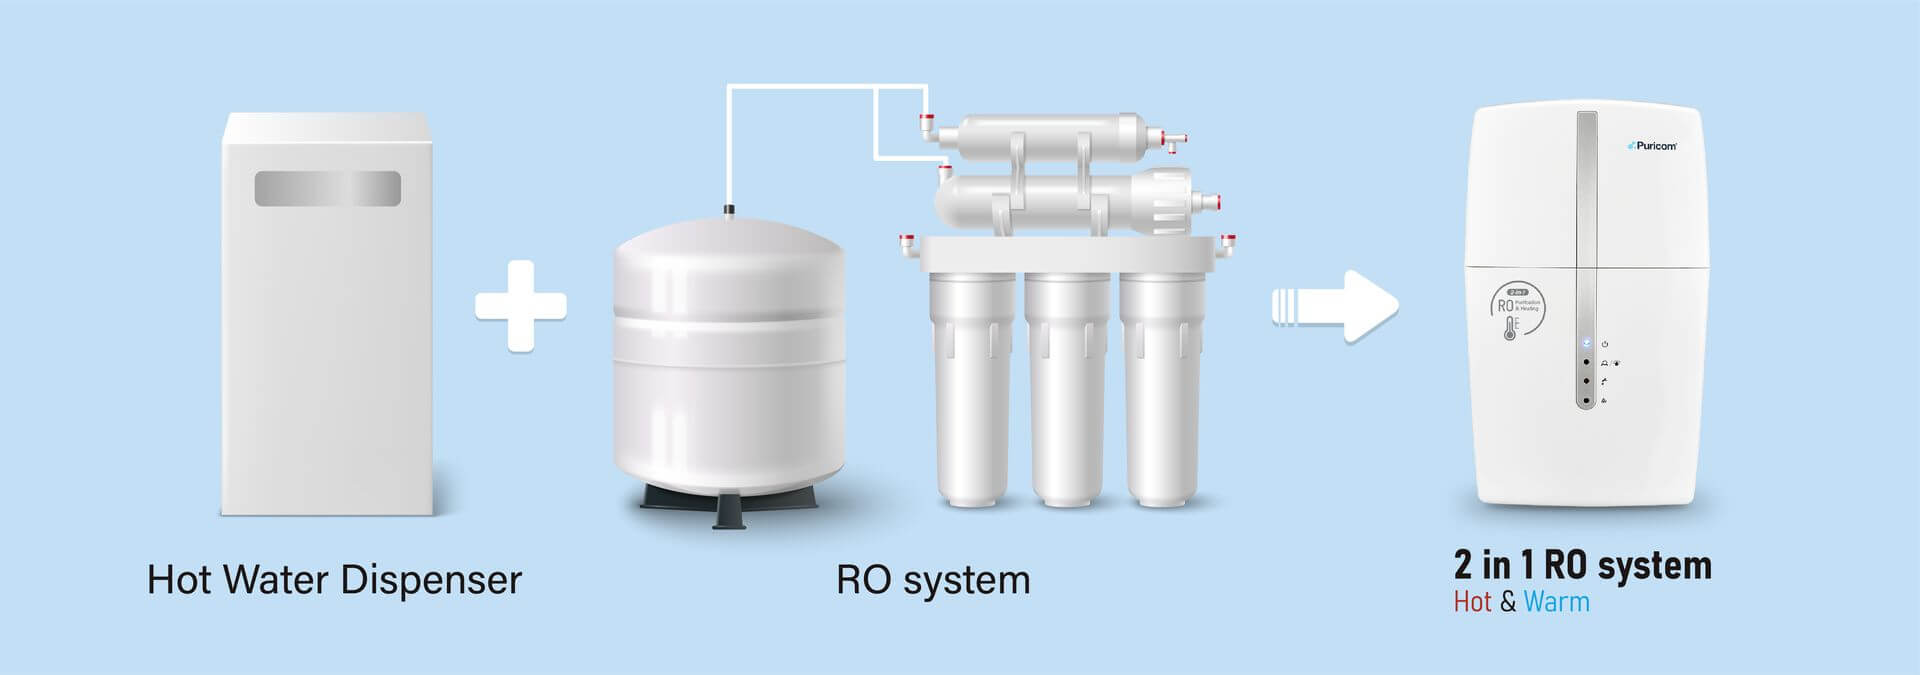 Puricom CQE-HV 2 in 1 Hot Water RO System = Hot Water Dispenser + RO System